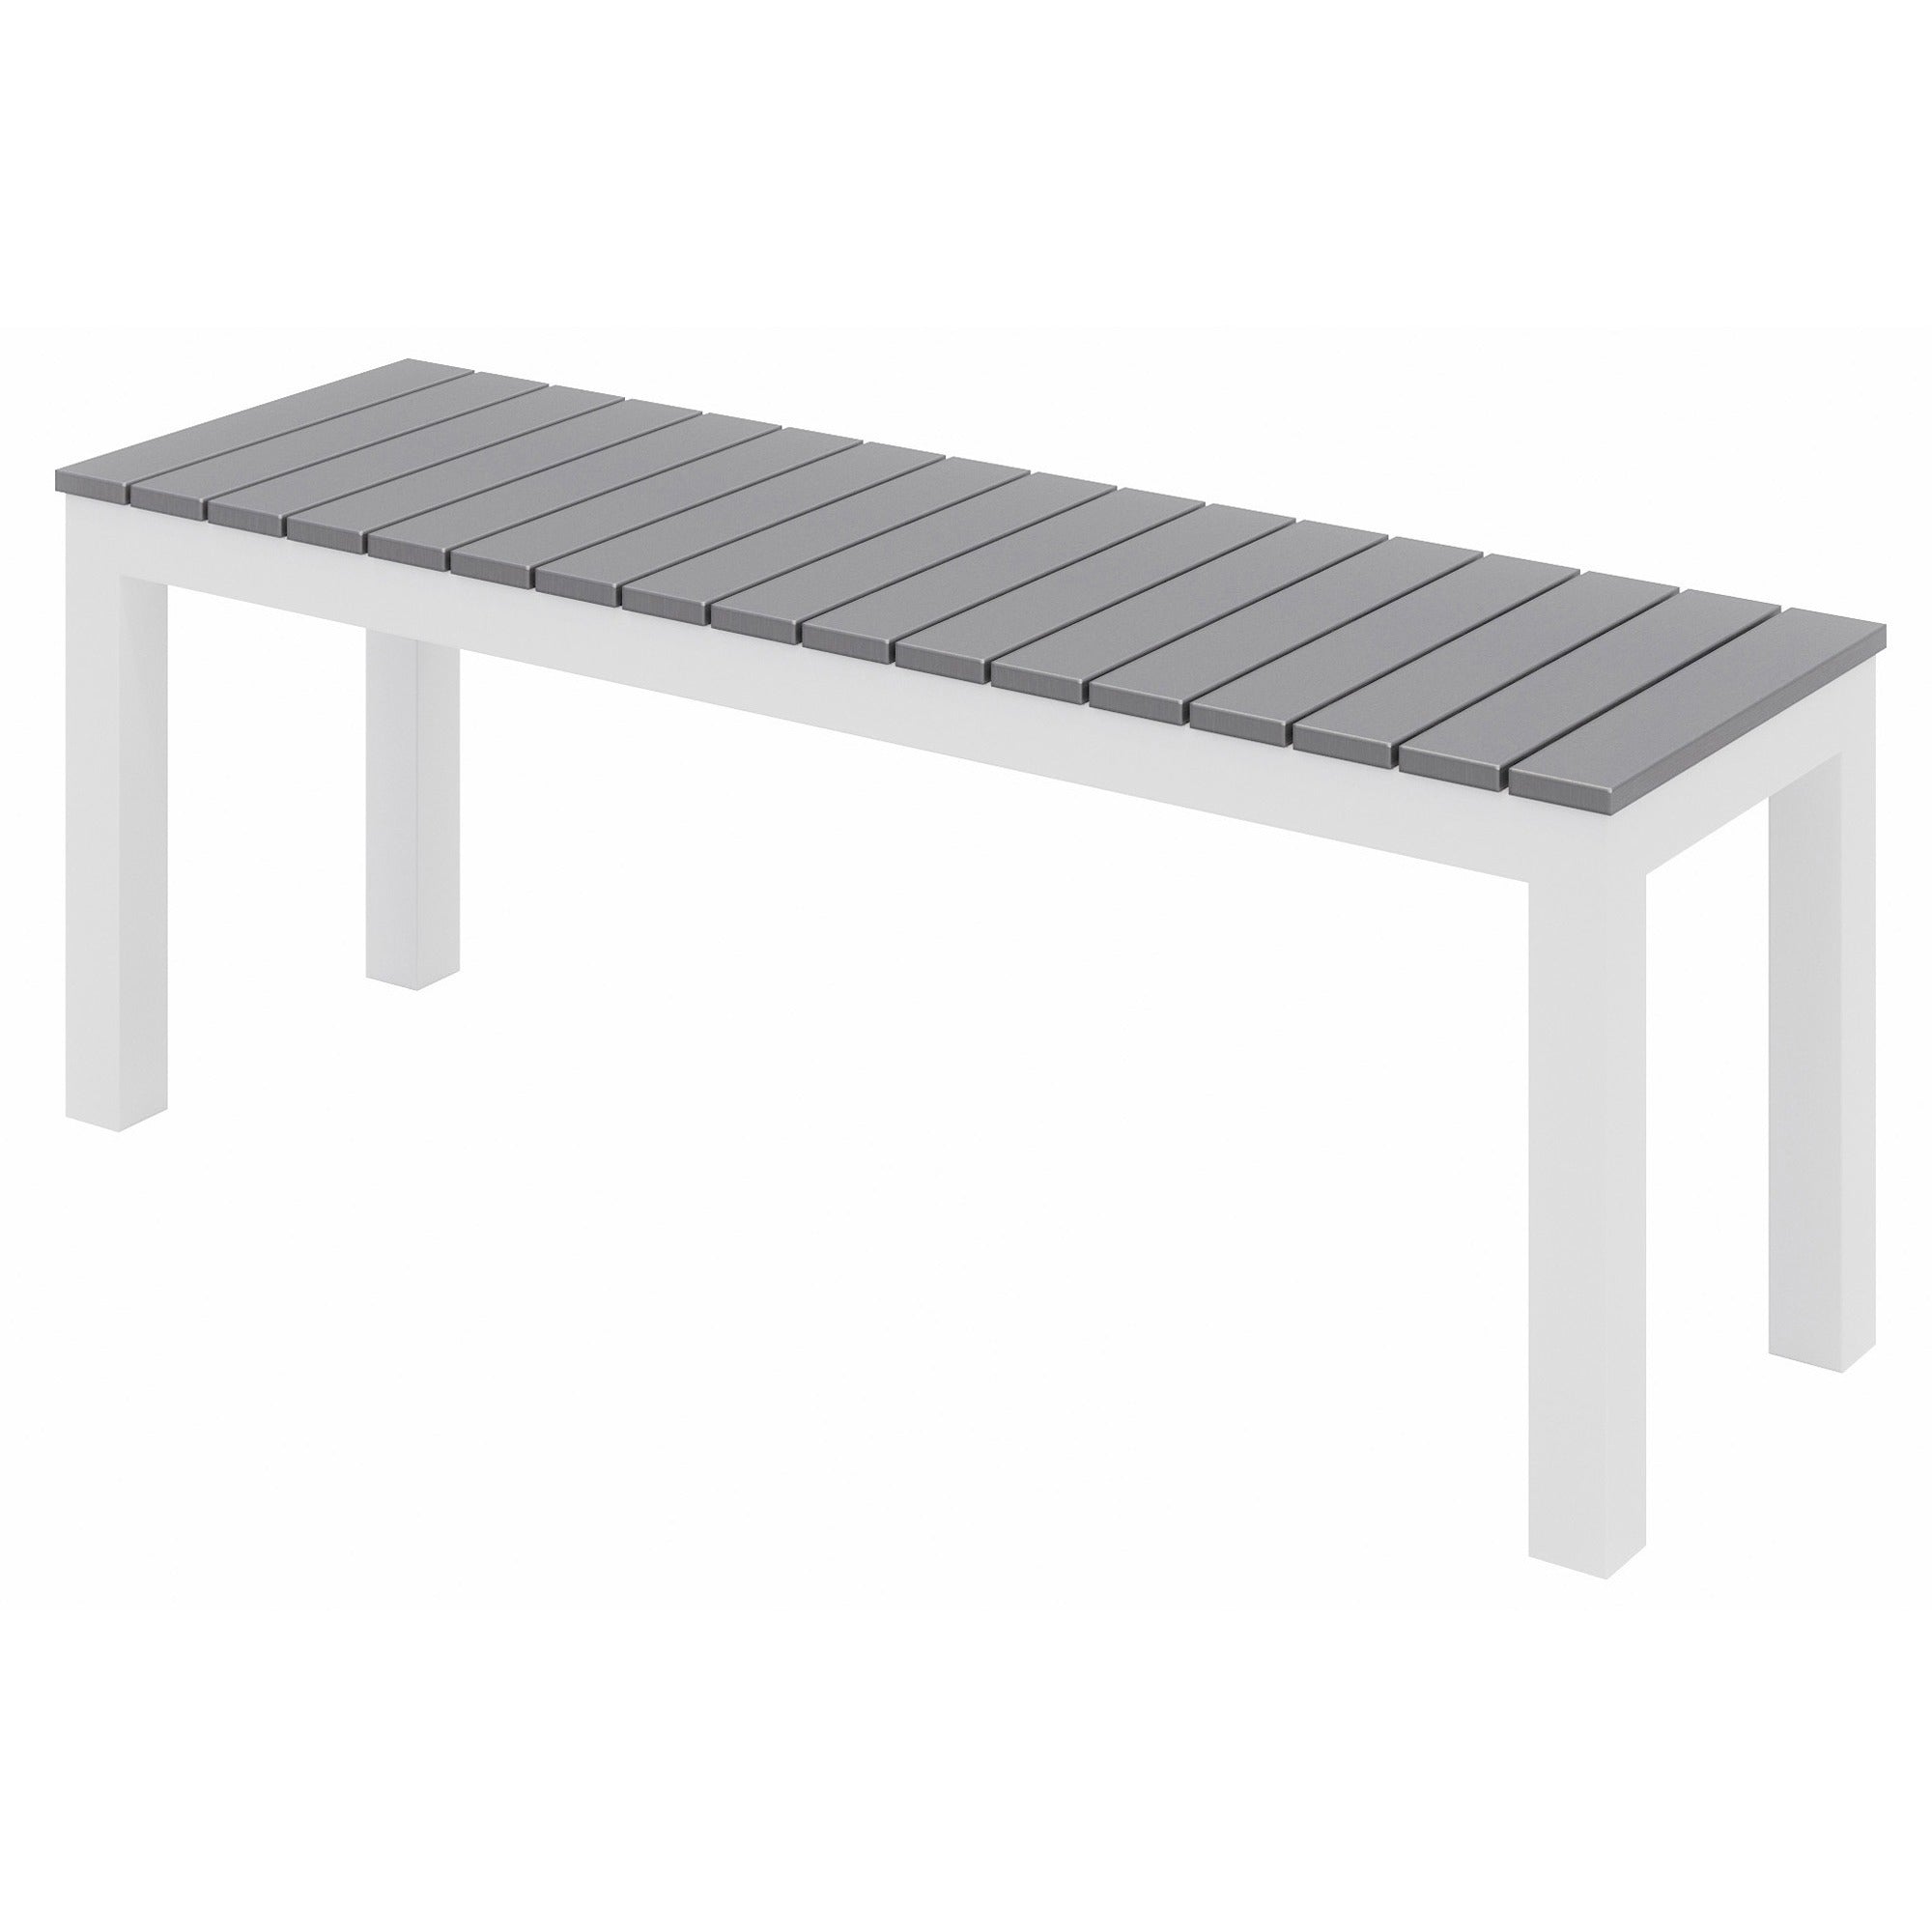 kfi-gray-indoor-outdoor-furniture-synthetic-polymer-seat-aluminum-frame-gray-1-each_kfibn5601whgy - 1